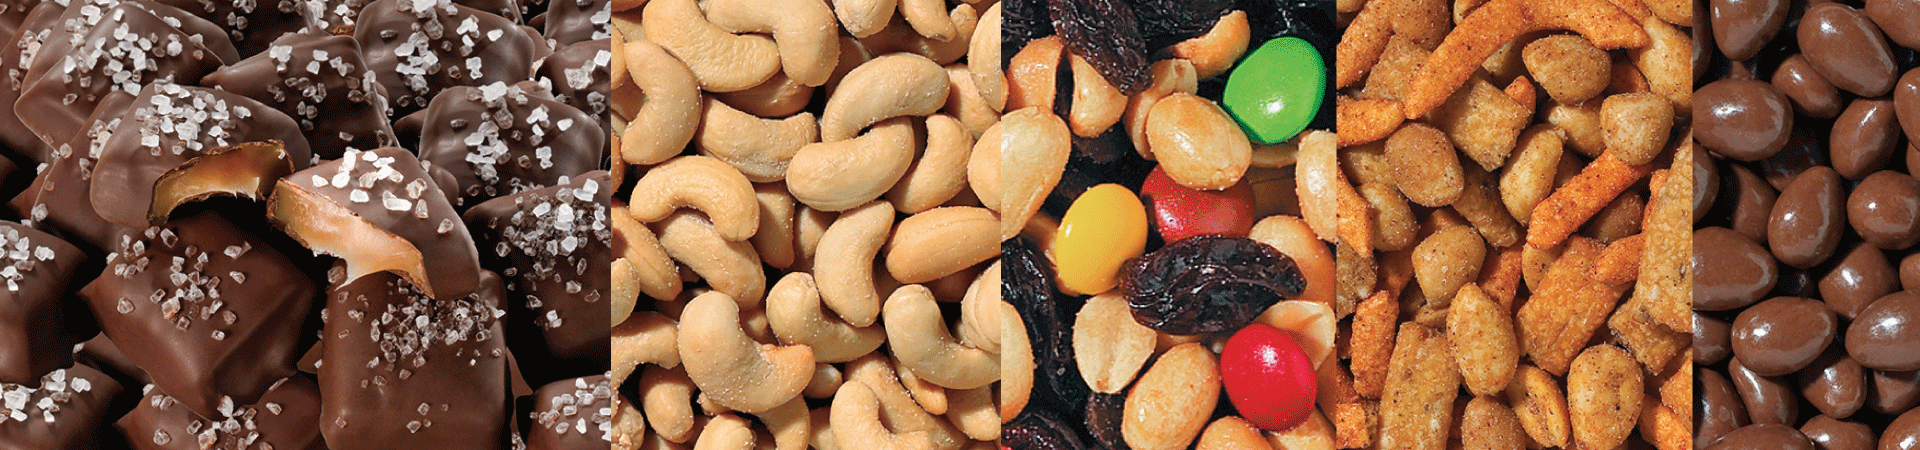  fall product nuts and candy items 